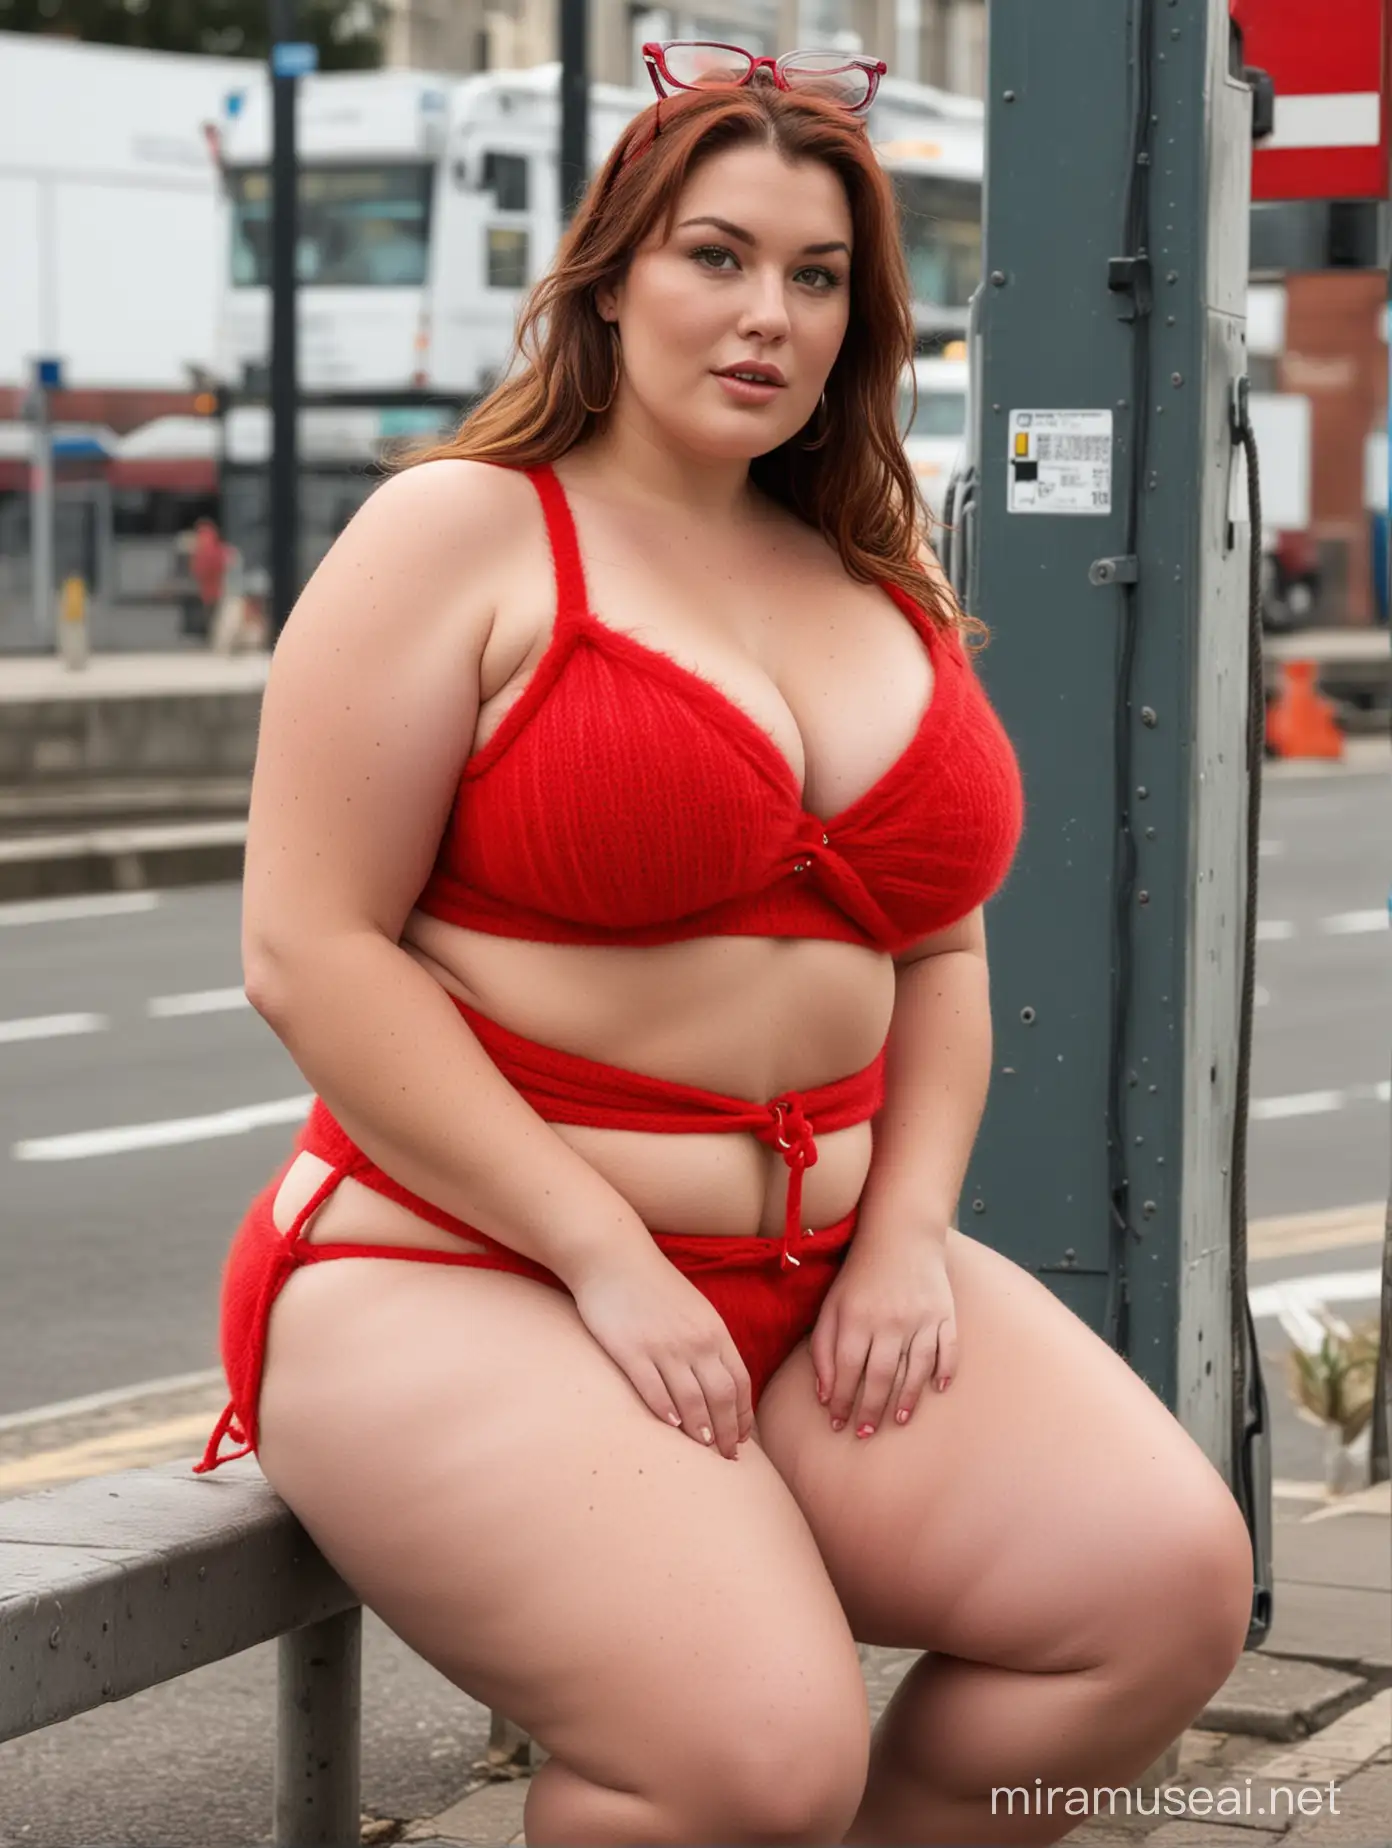 Curvy Woman in Thick Red Bikini at Bus Stop